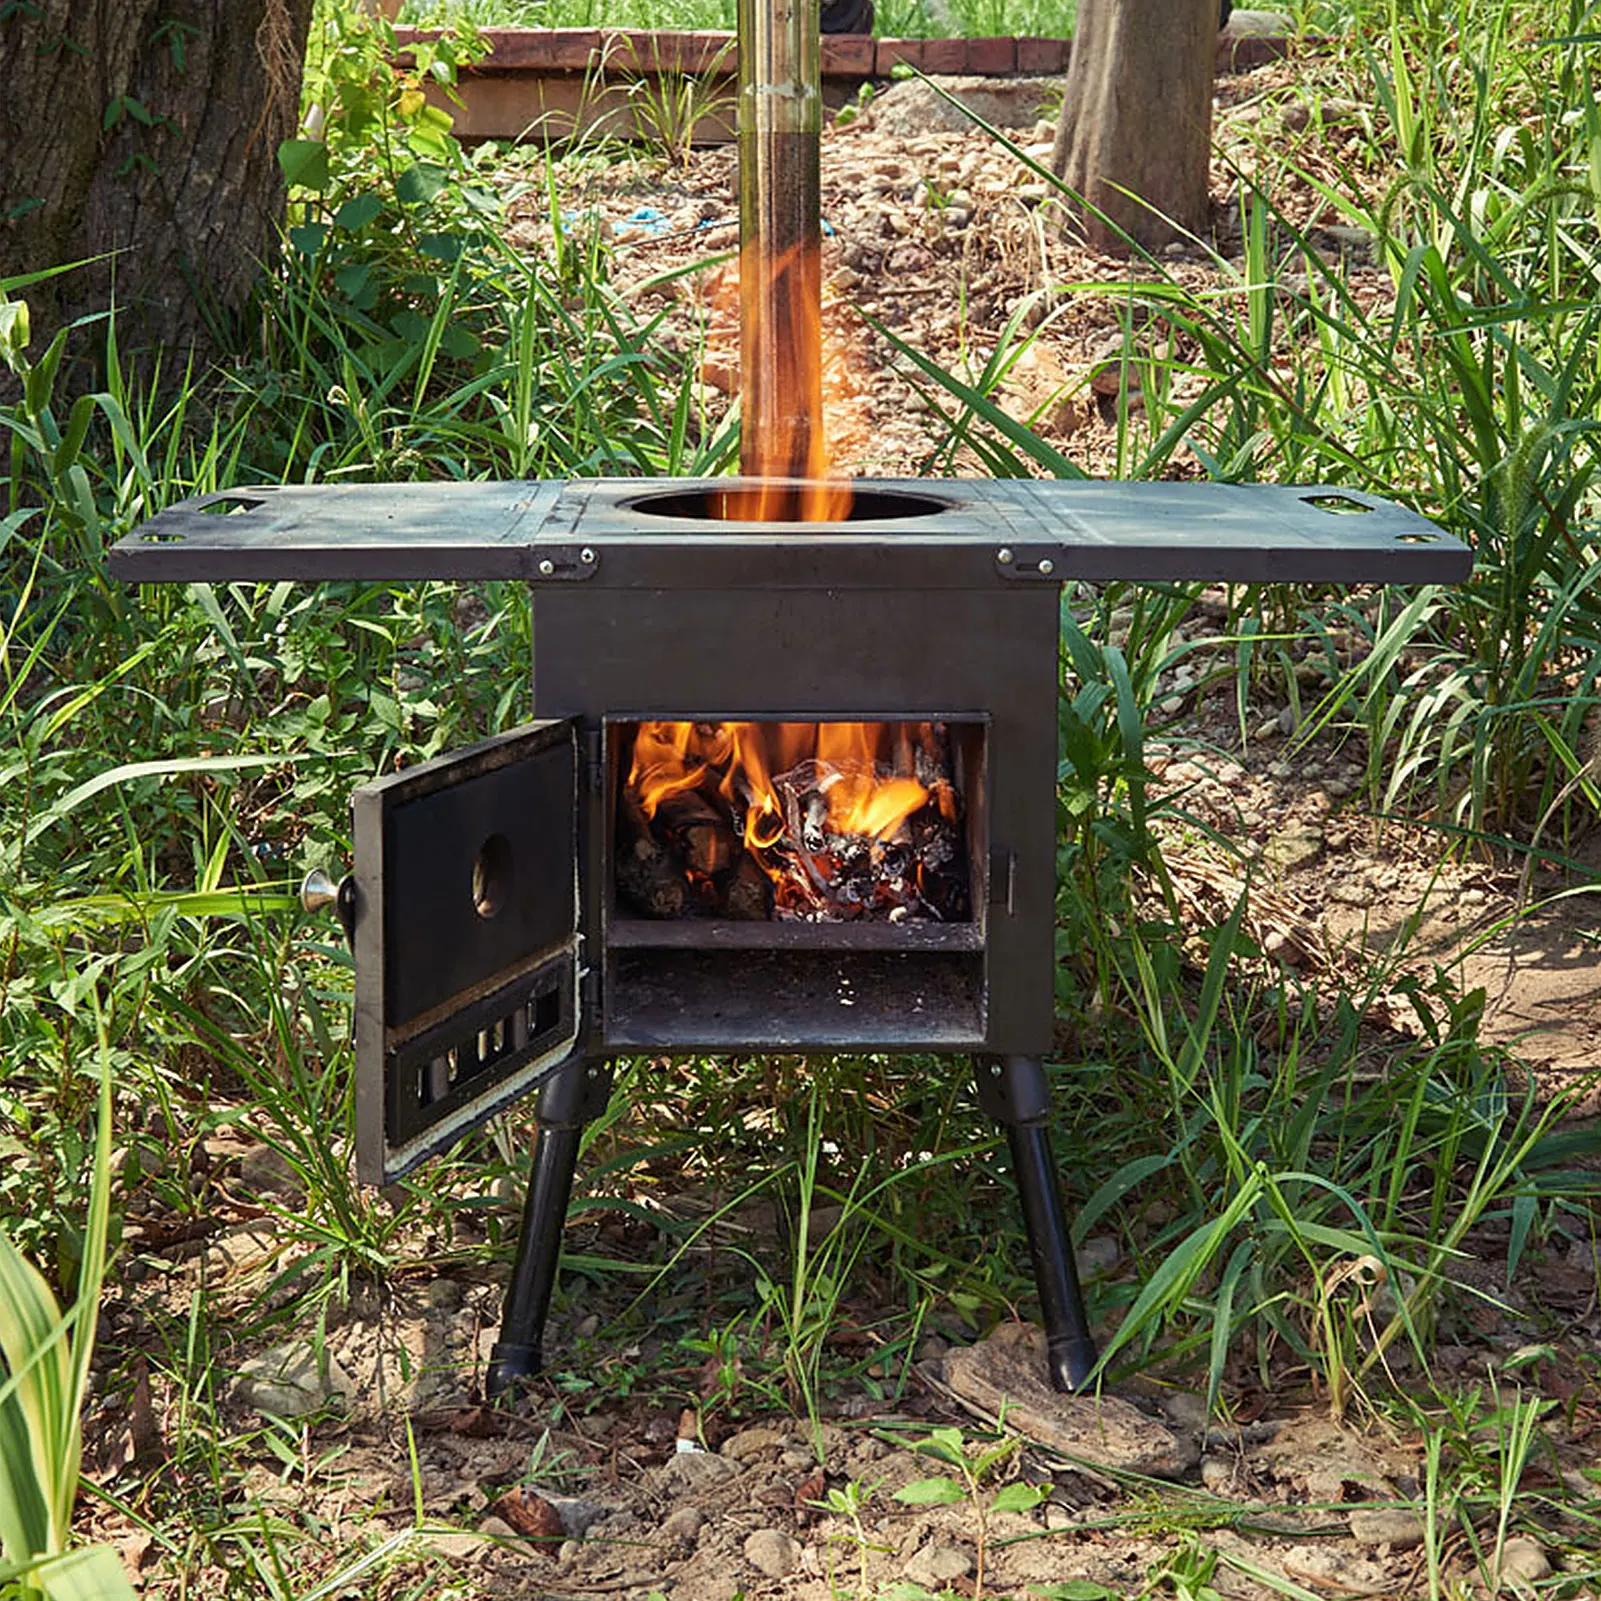 Wood Burning Stove Portable Camp Wood Stove With Chimney Heating